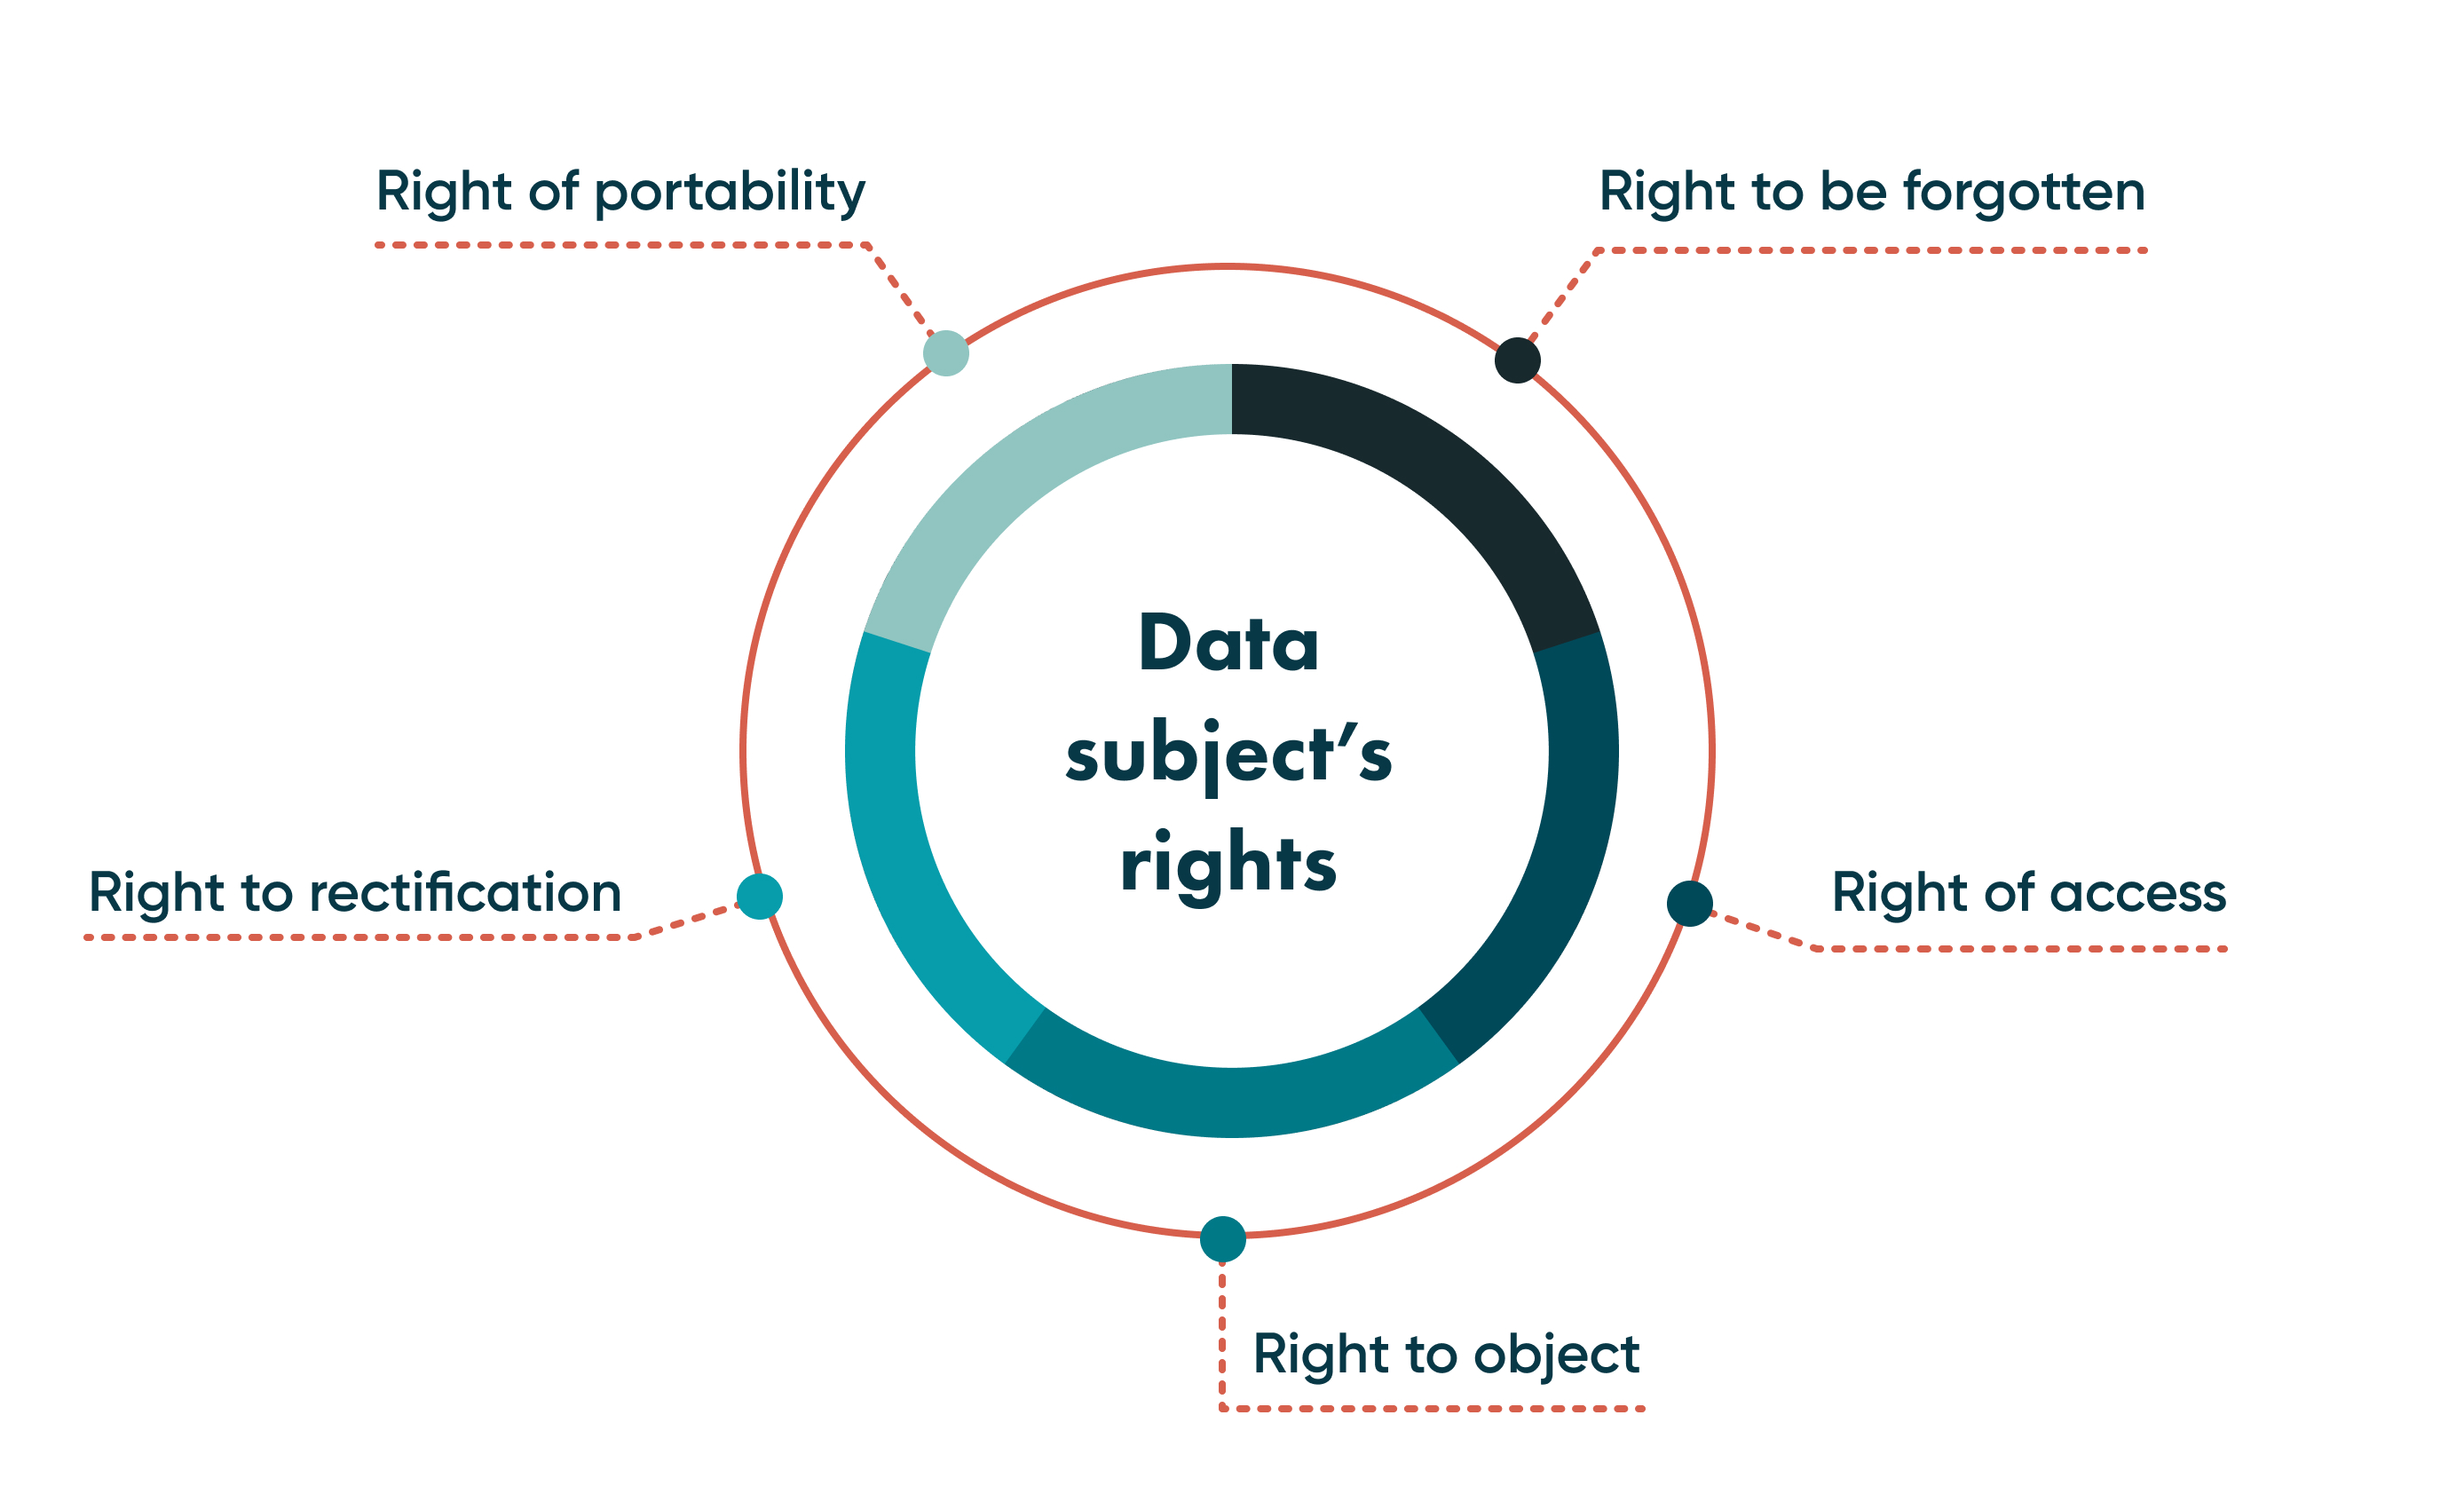 GDPR protects data subject's privacy rights. Among them, the most significant are the right to be forgotten, the right of access, the right to object, the right to rectification, and the right of portability.